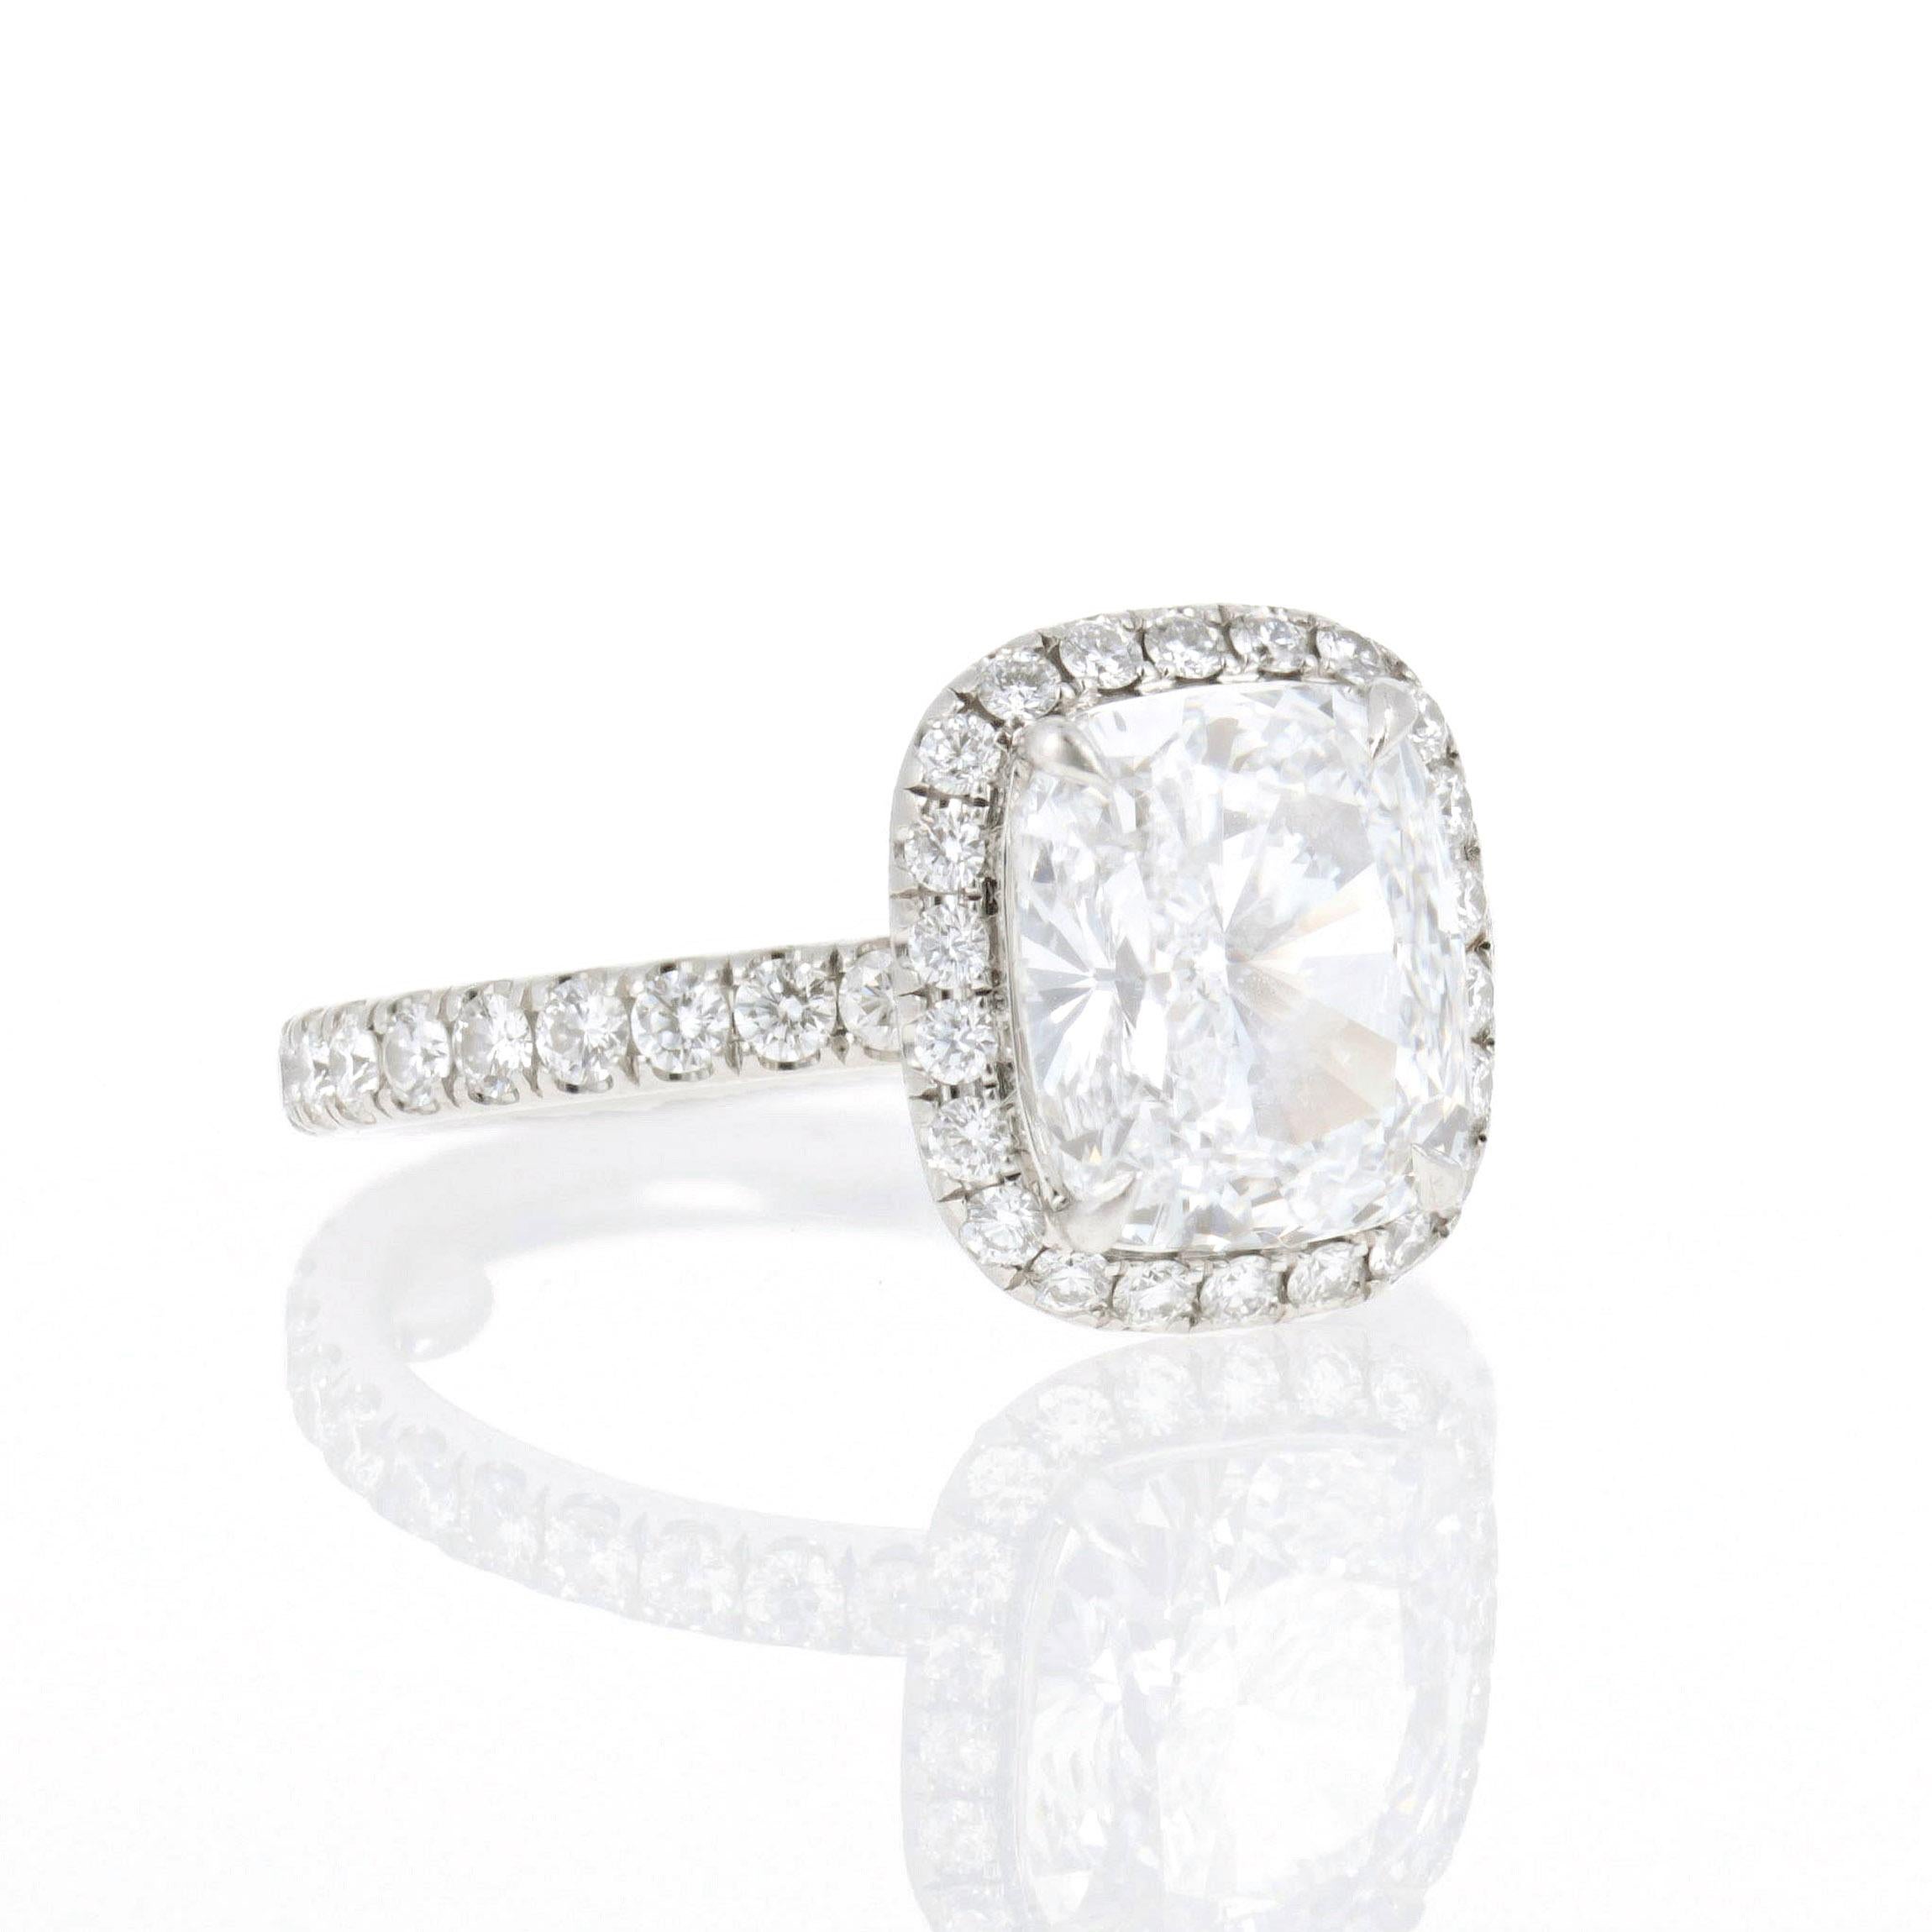 Centering upon a cushion-cut diamond of 2.59 carats, with a diamond-pave platinum mounting. Signed HW for Harry Winston and serial number 267225. With report no. 16768414 dated September 5, 2012, from GIA stating that the diamond is D color and VVS1